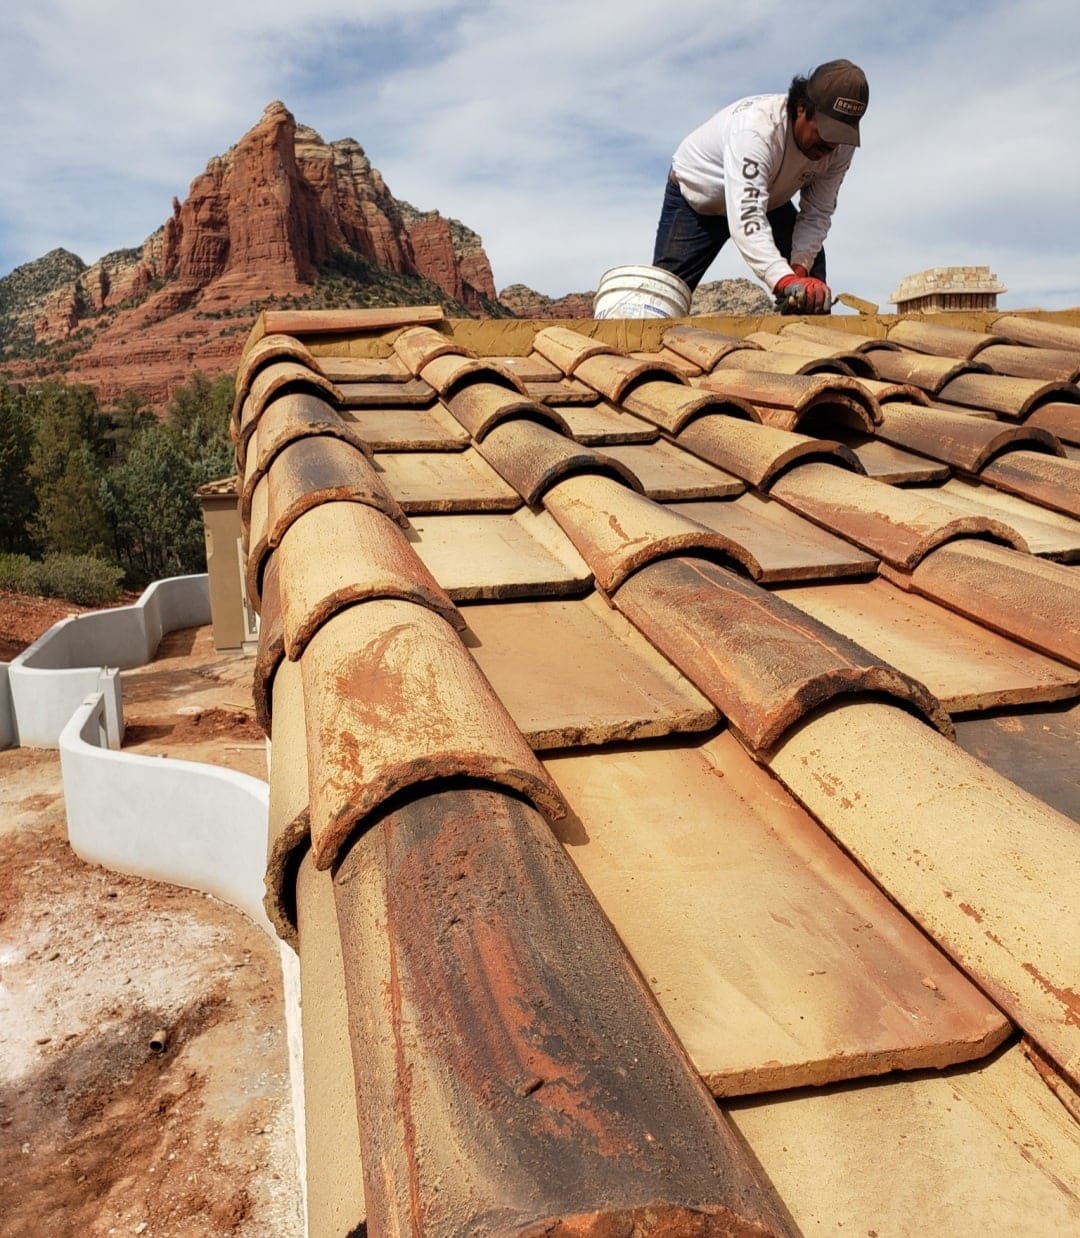 Expert at work: a Desert Mountain roofer ensuring perfection on a tile roof.